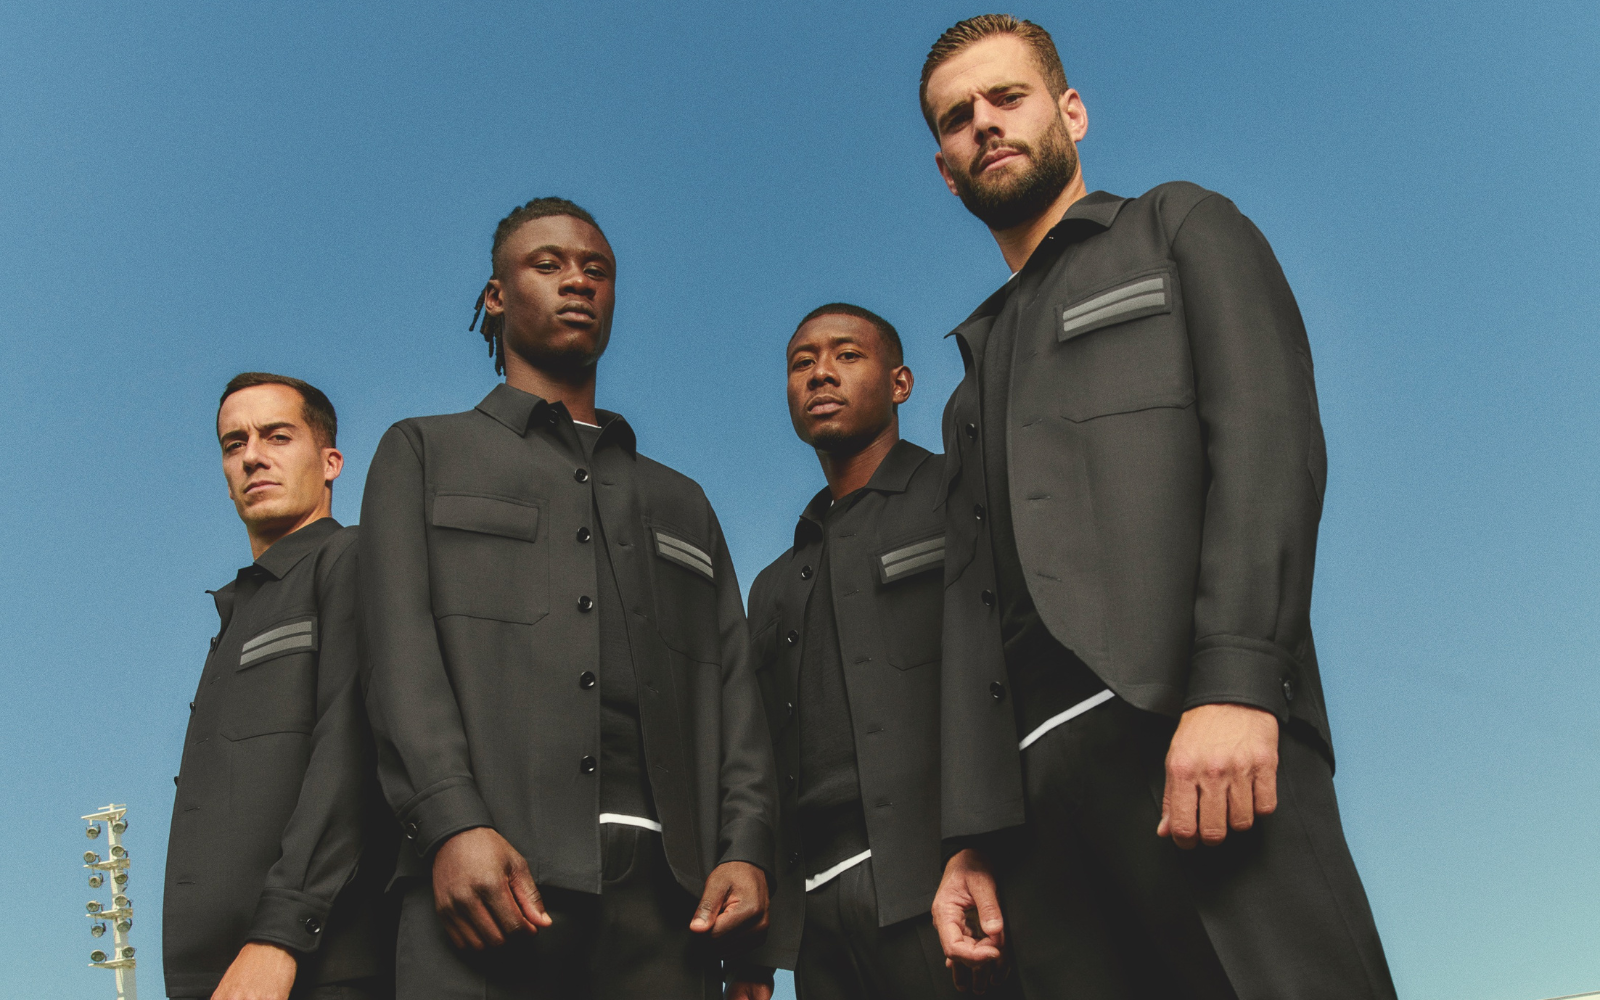 Spotted: Real Madrid Squad in ZEGNA - Time International